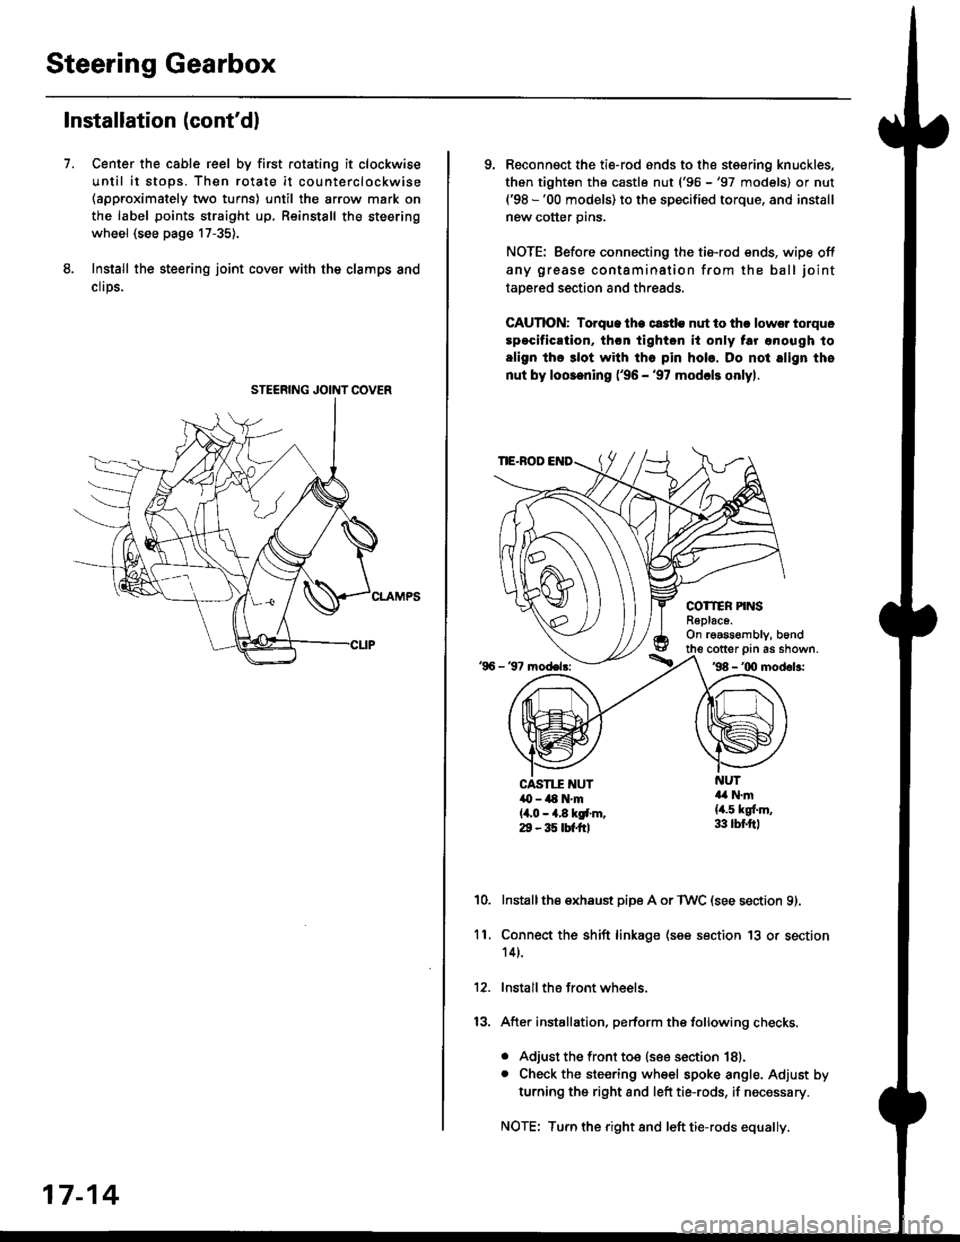 HONDA CIVIC 1998 6.G Workshop Manual Steering Gearbox
Installation (contdl
Center the cable reel by first rotating it clockwise
until it stops. Then rotate it counterclockwise(approximately two turns) until the arrow mark on
the label p